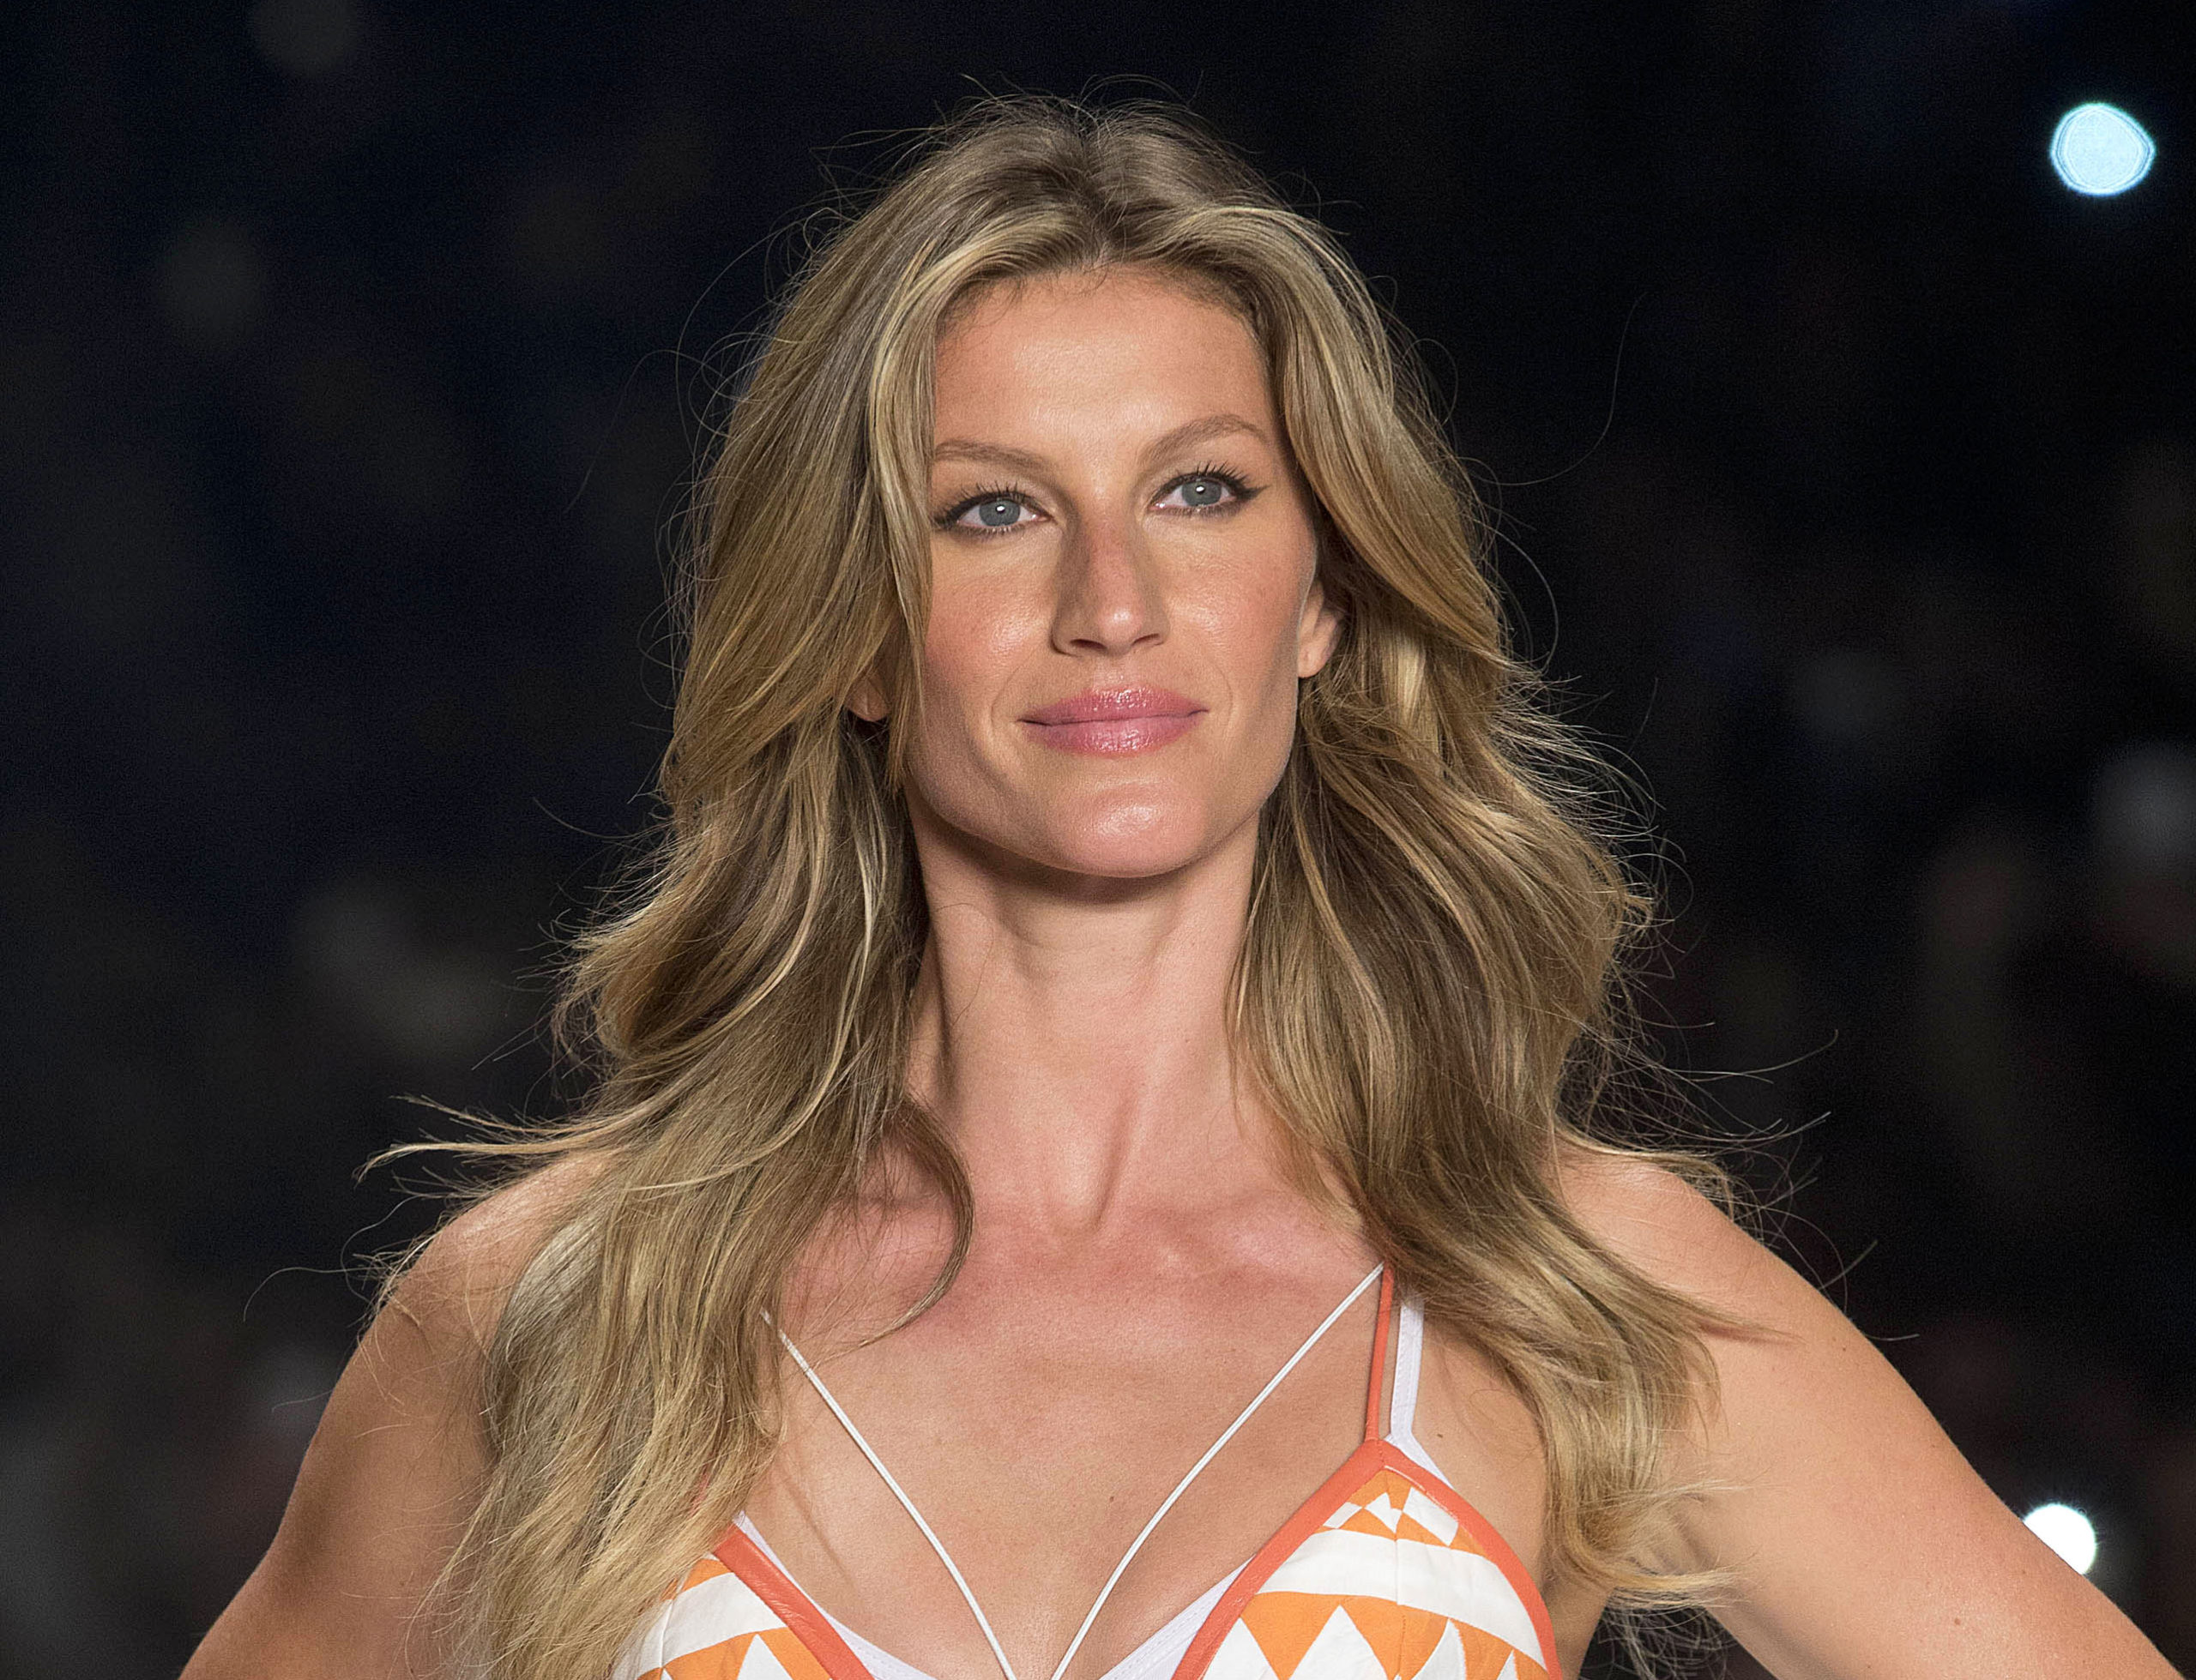 Louis Vuitton on X: .@GiseleOfficial will escort the